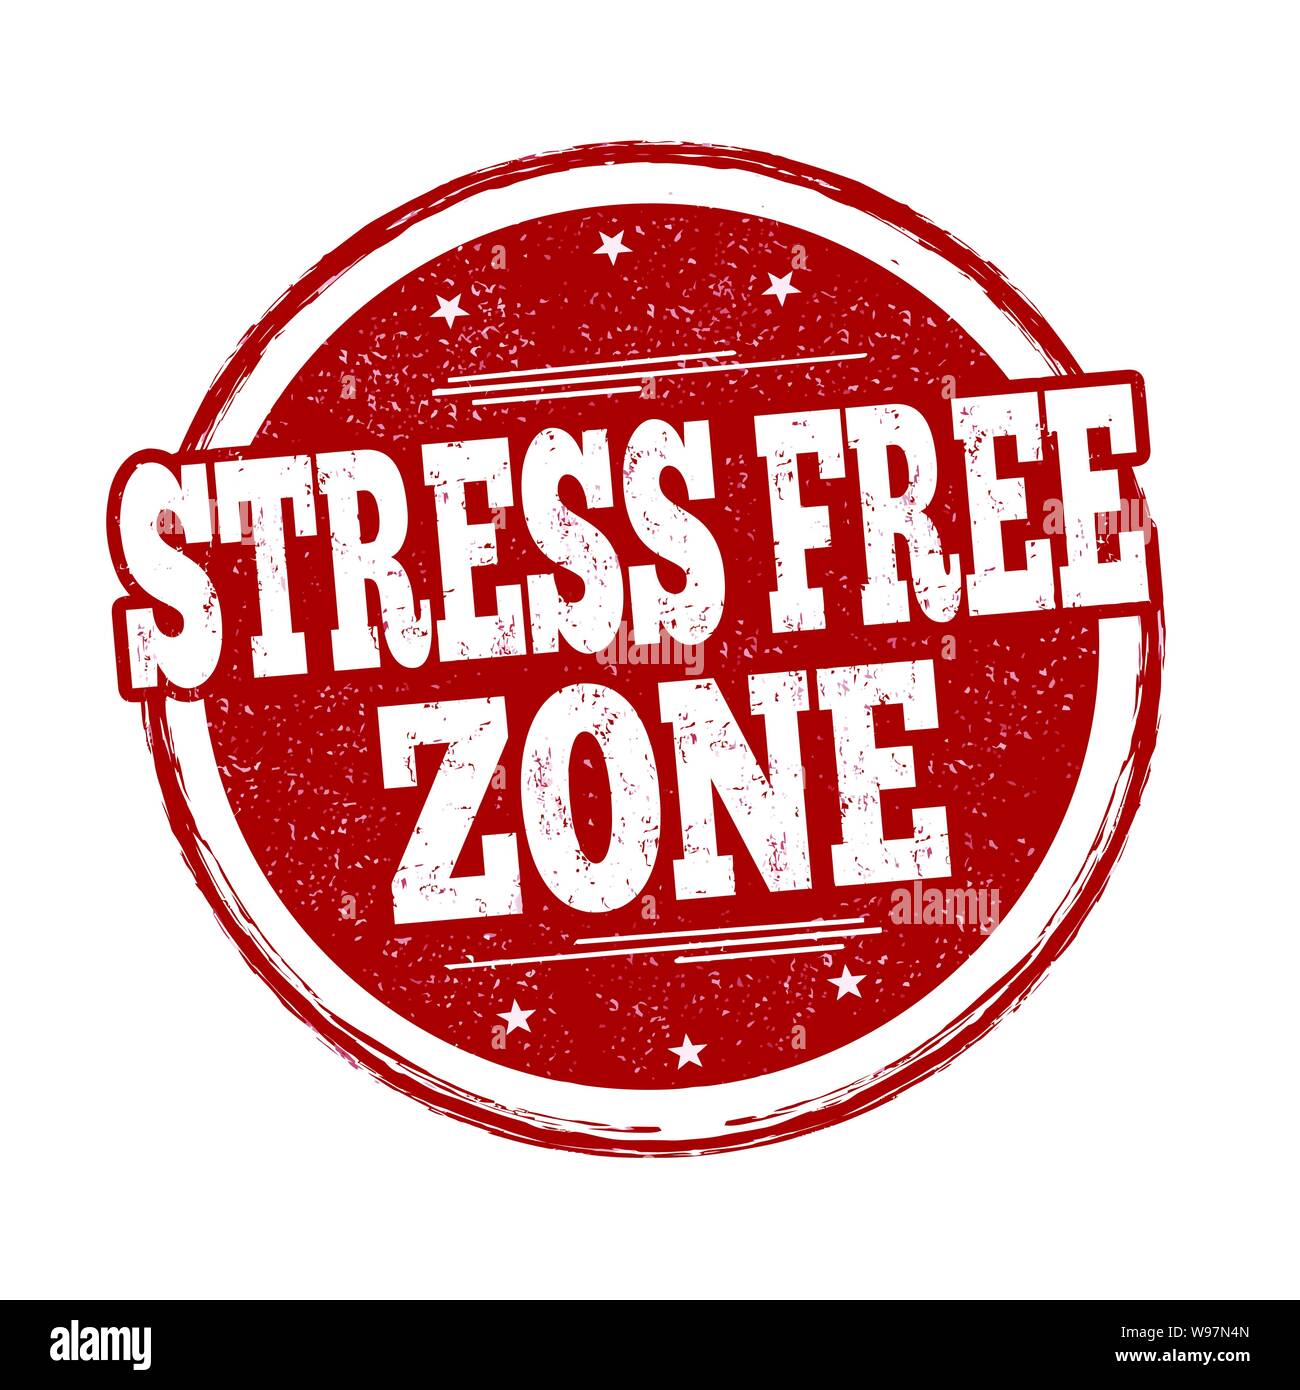 Stress free zone sign or stamp on white background, vector illustration Stock Vector